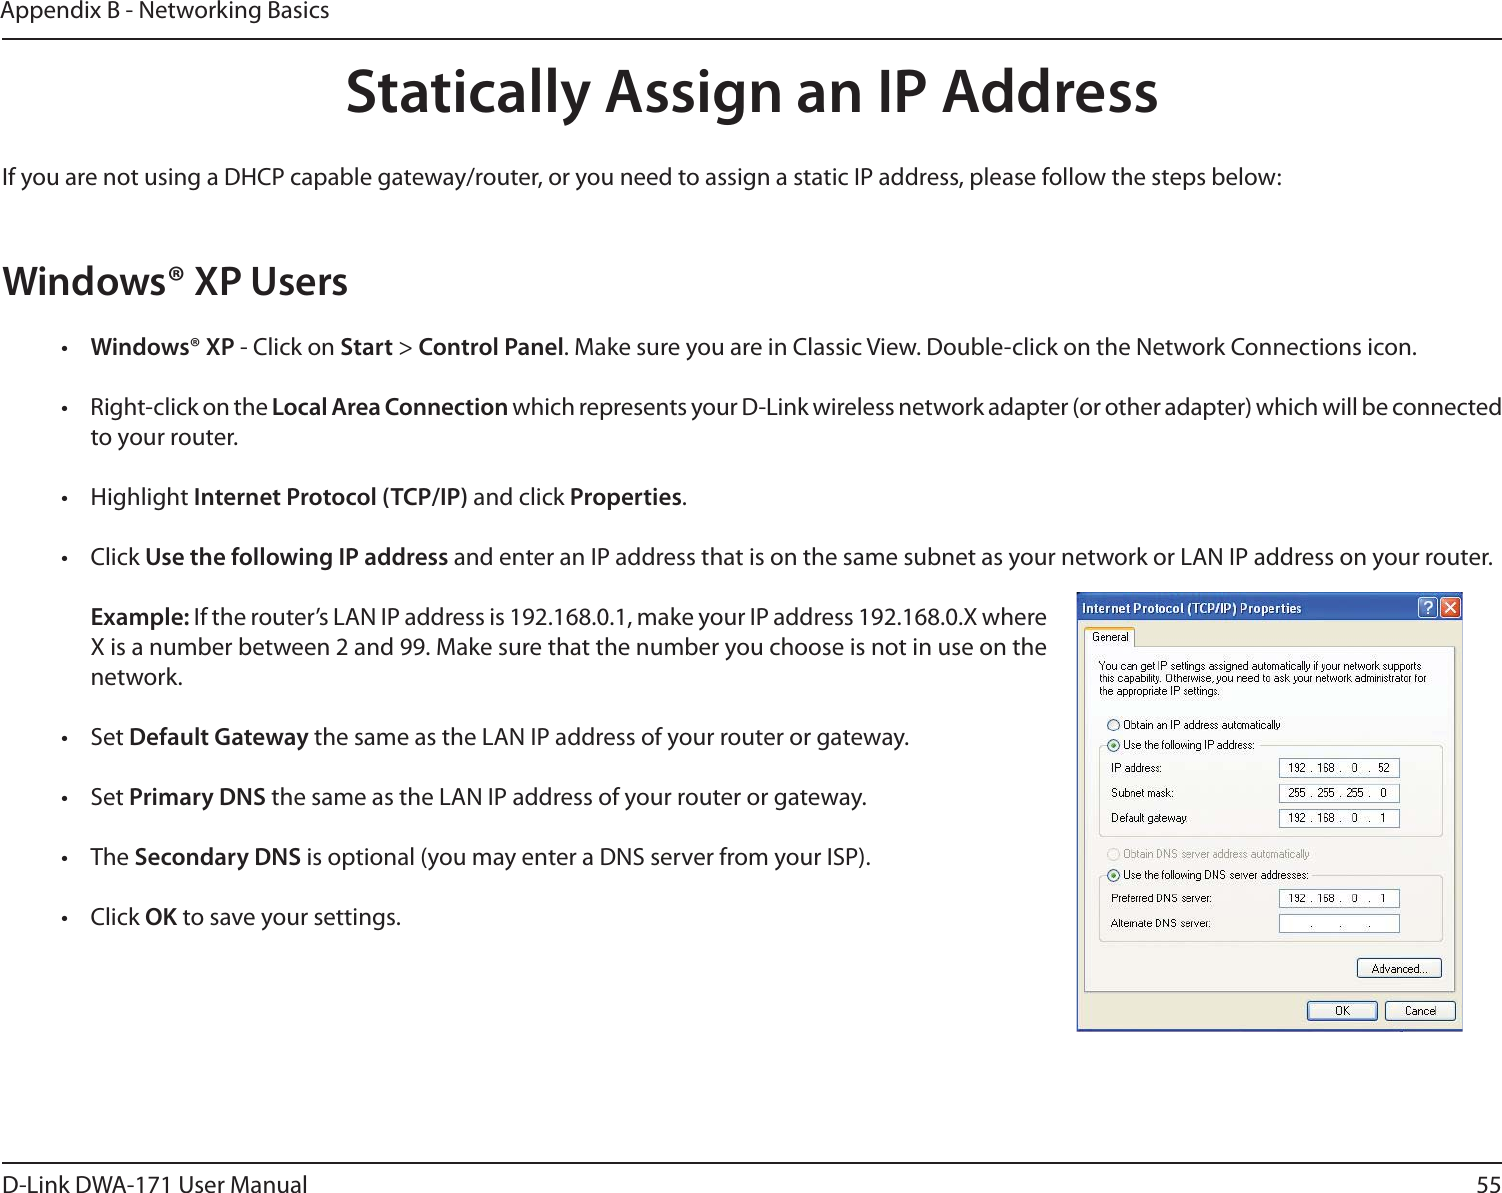 55D-Link DWA-171 User ManualAppendix B - Networking BasicsStatically Assign an IP AddressIf you are not using a DHCP capable gateway/router, or you need to assign a static IP address, please follow the steps below:Windows® XP Users•  Windows® XP - Click on Start &gt; Control Panel. Make sure you are in Classic View. Double-click on the Network Connections icon.•  Right-click on the Local Area Connection which represents your D-Link wireless network adapter (or other adapter) which will be connected to your router.• Highlight Internet Protocol (TCP/IP) and click Properties.• Click Use the following IP address and enter an IP address that is on the same subnet as your network or LAN IP address on your router. Example: If the router’s LAN IP address is 192.168.0.1, make your IP address 192.168.0.X where X is a number between 2 and 99. Make sure that the number you choose is not in use on the network. • Set Default Gateway the same as the LAN IP address of your router or gateway.• Set Primary DNS the same as the LAN IP address of your router or gateway. • The Secondary DNS is optional (you may enter a DNS server from your ISP).• Click OK to save your settings.